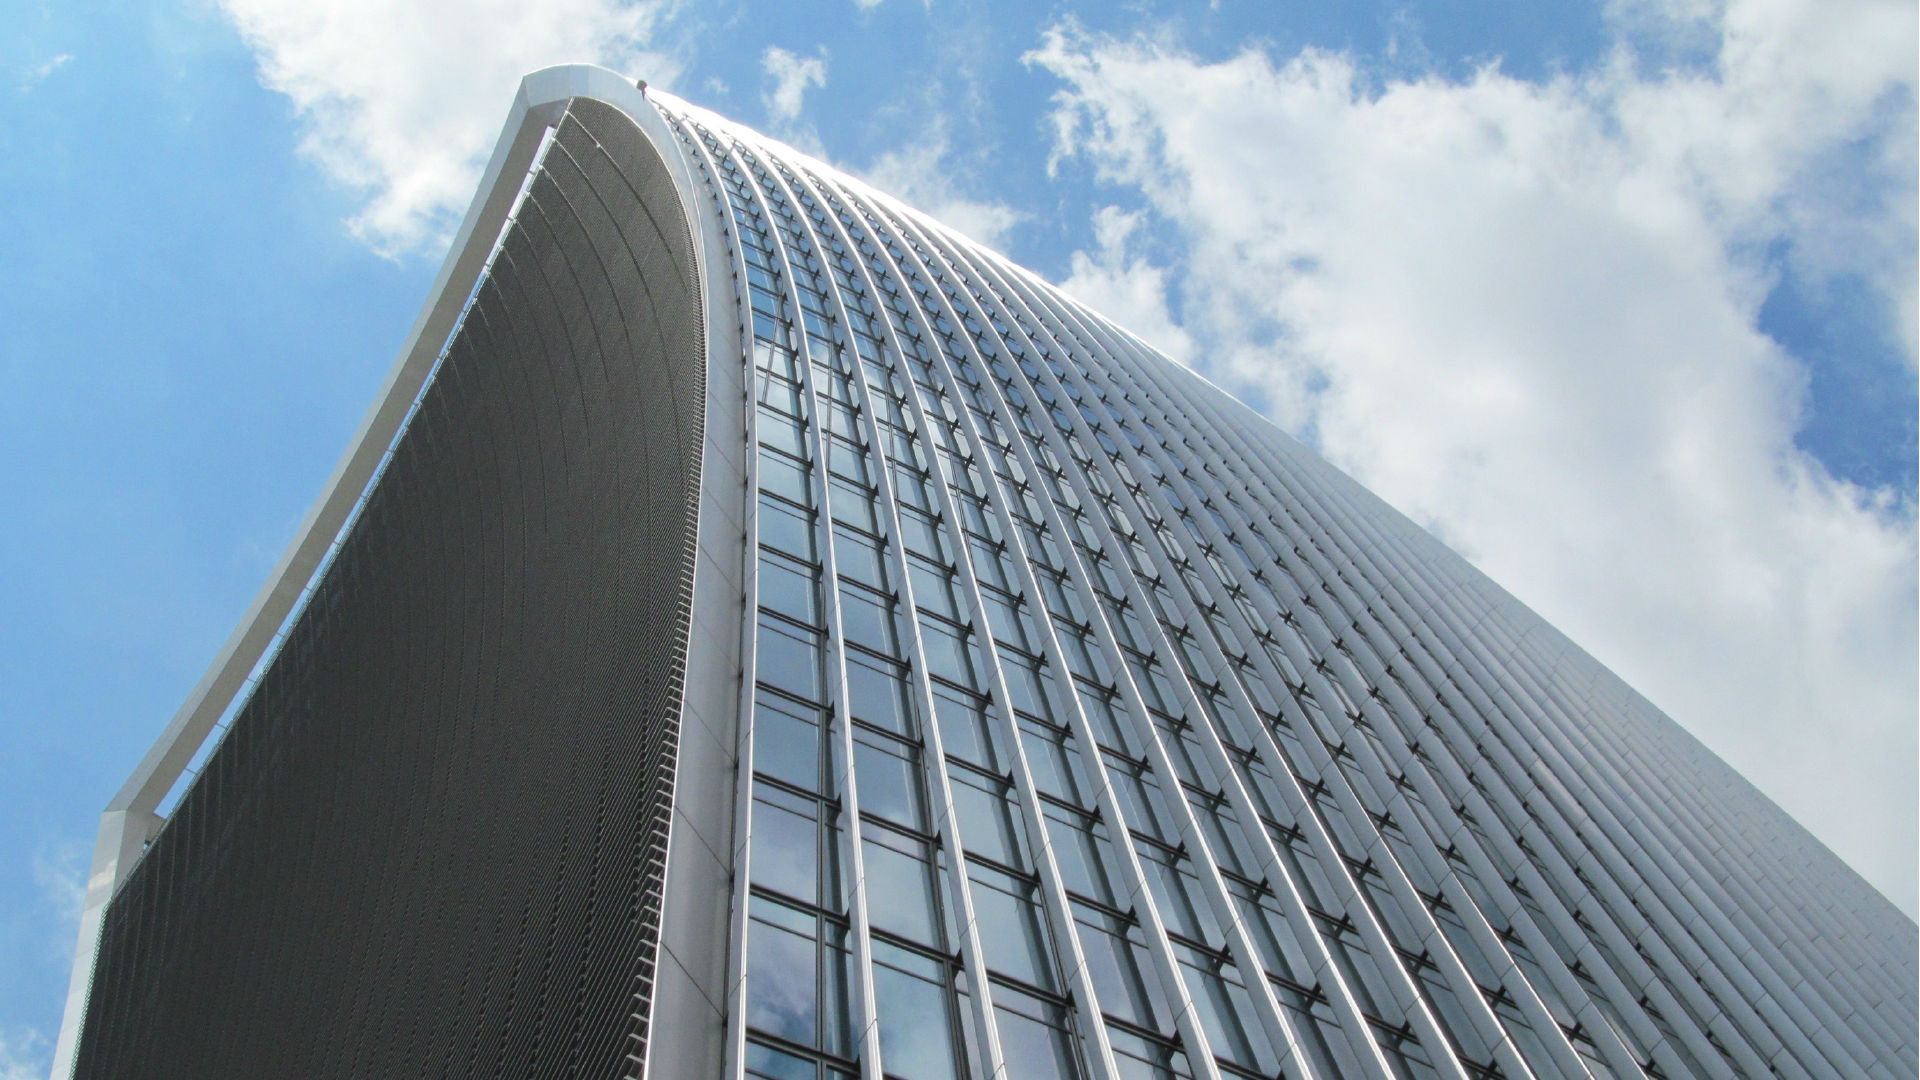 A view looking up to the top of 20 Fenchurch Street, the Walkie Talkie London. © Shutterstock / David Burrows